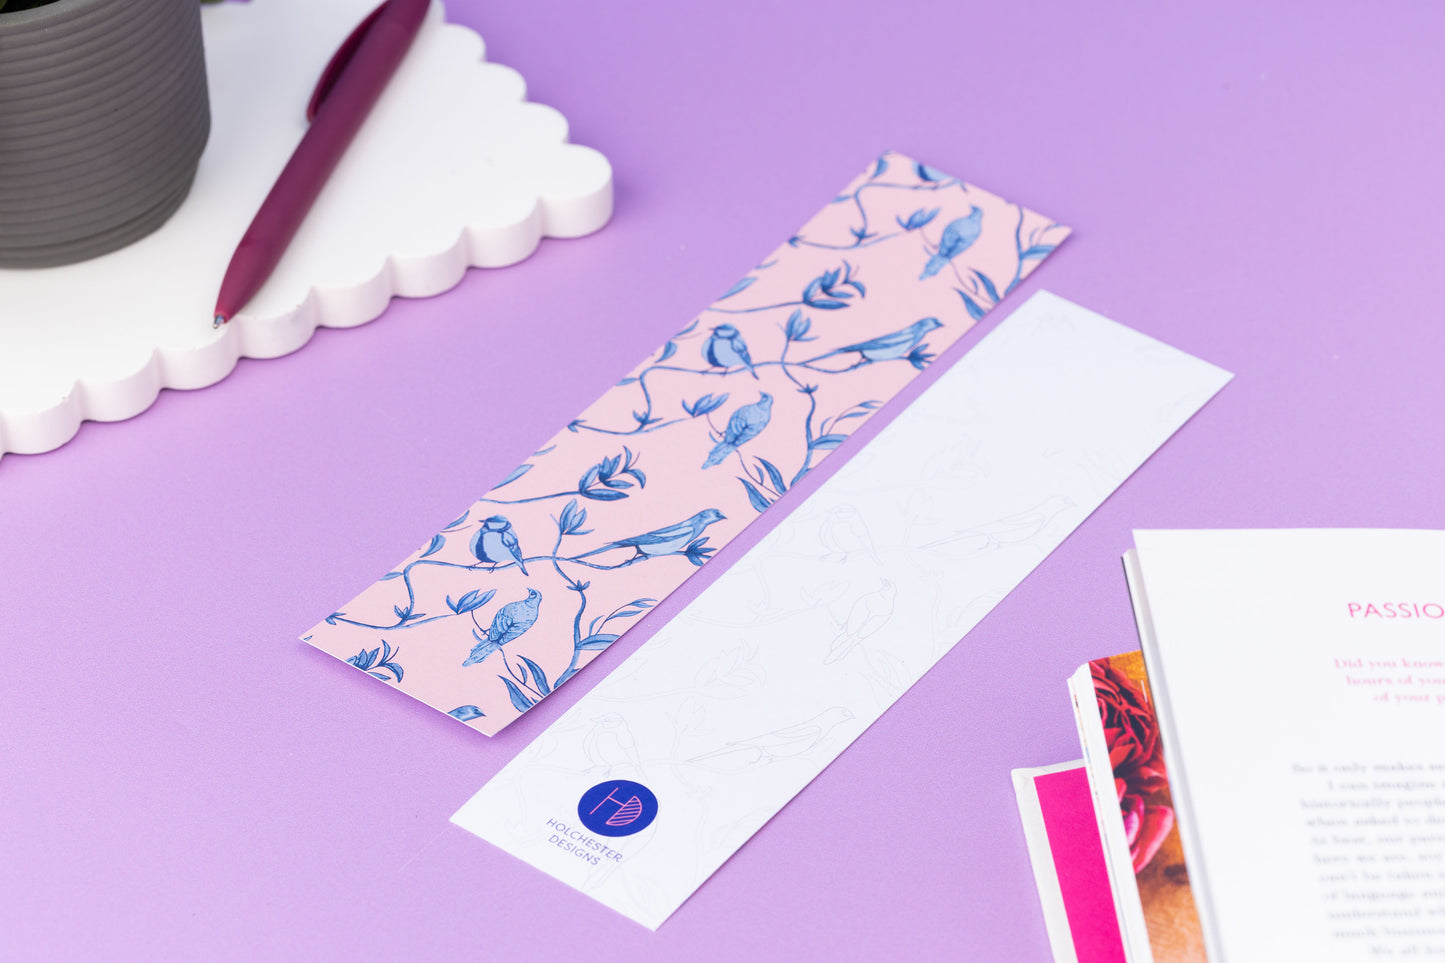 Two of the Brighton Birds double-sided bookmarks, on a lilac desk with a book open to the bottom right corner.  One side features the full-colour patterned side of the Brighton Birds pattern with the blush pink background and shades of blue branch, leaf and bird hand-painted motifs.  The other side is the light-grey line drawing.  